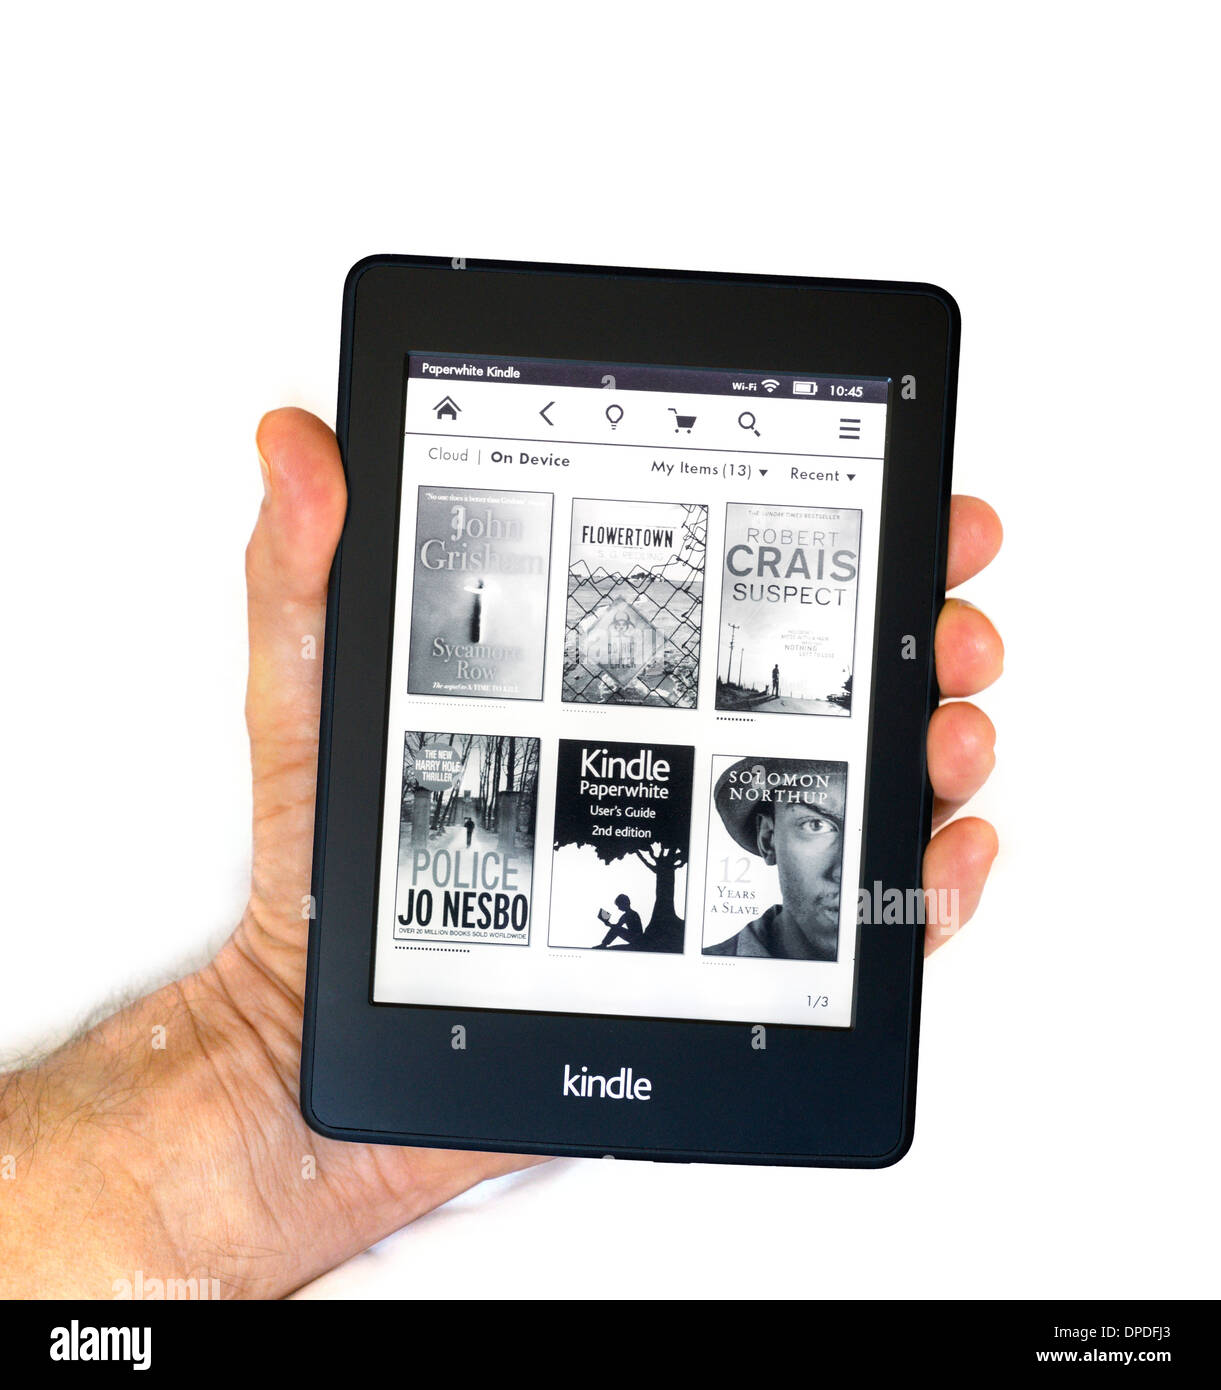 Home page on the 2013/14 Amazon Kindle Paperwhite E-Reader Stock Photo